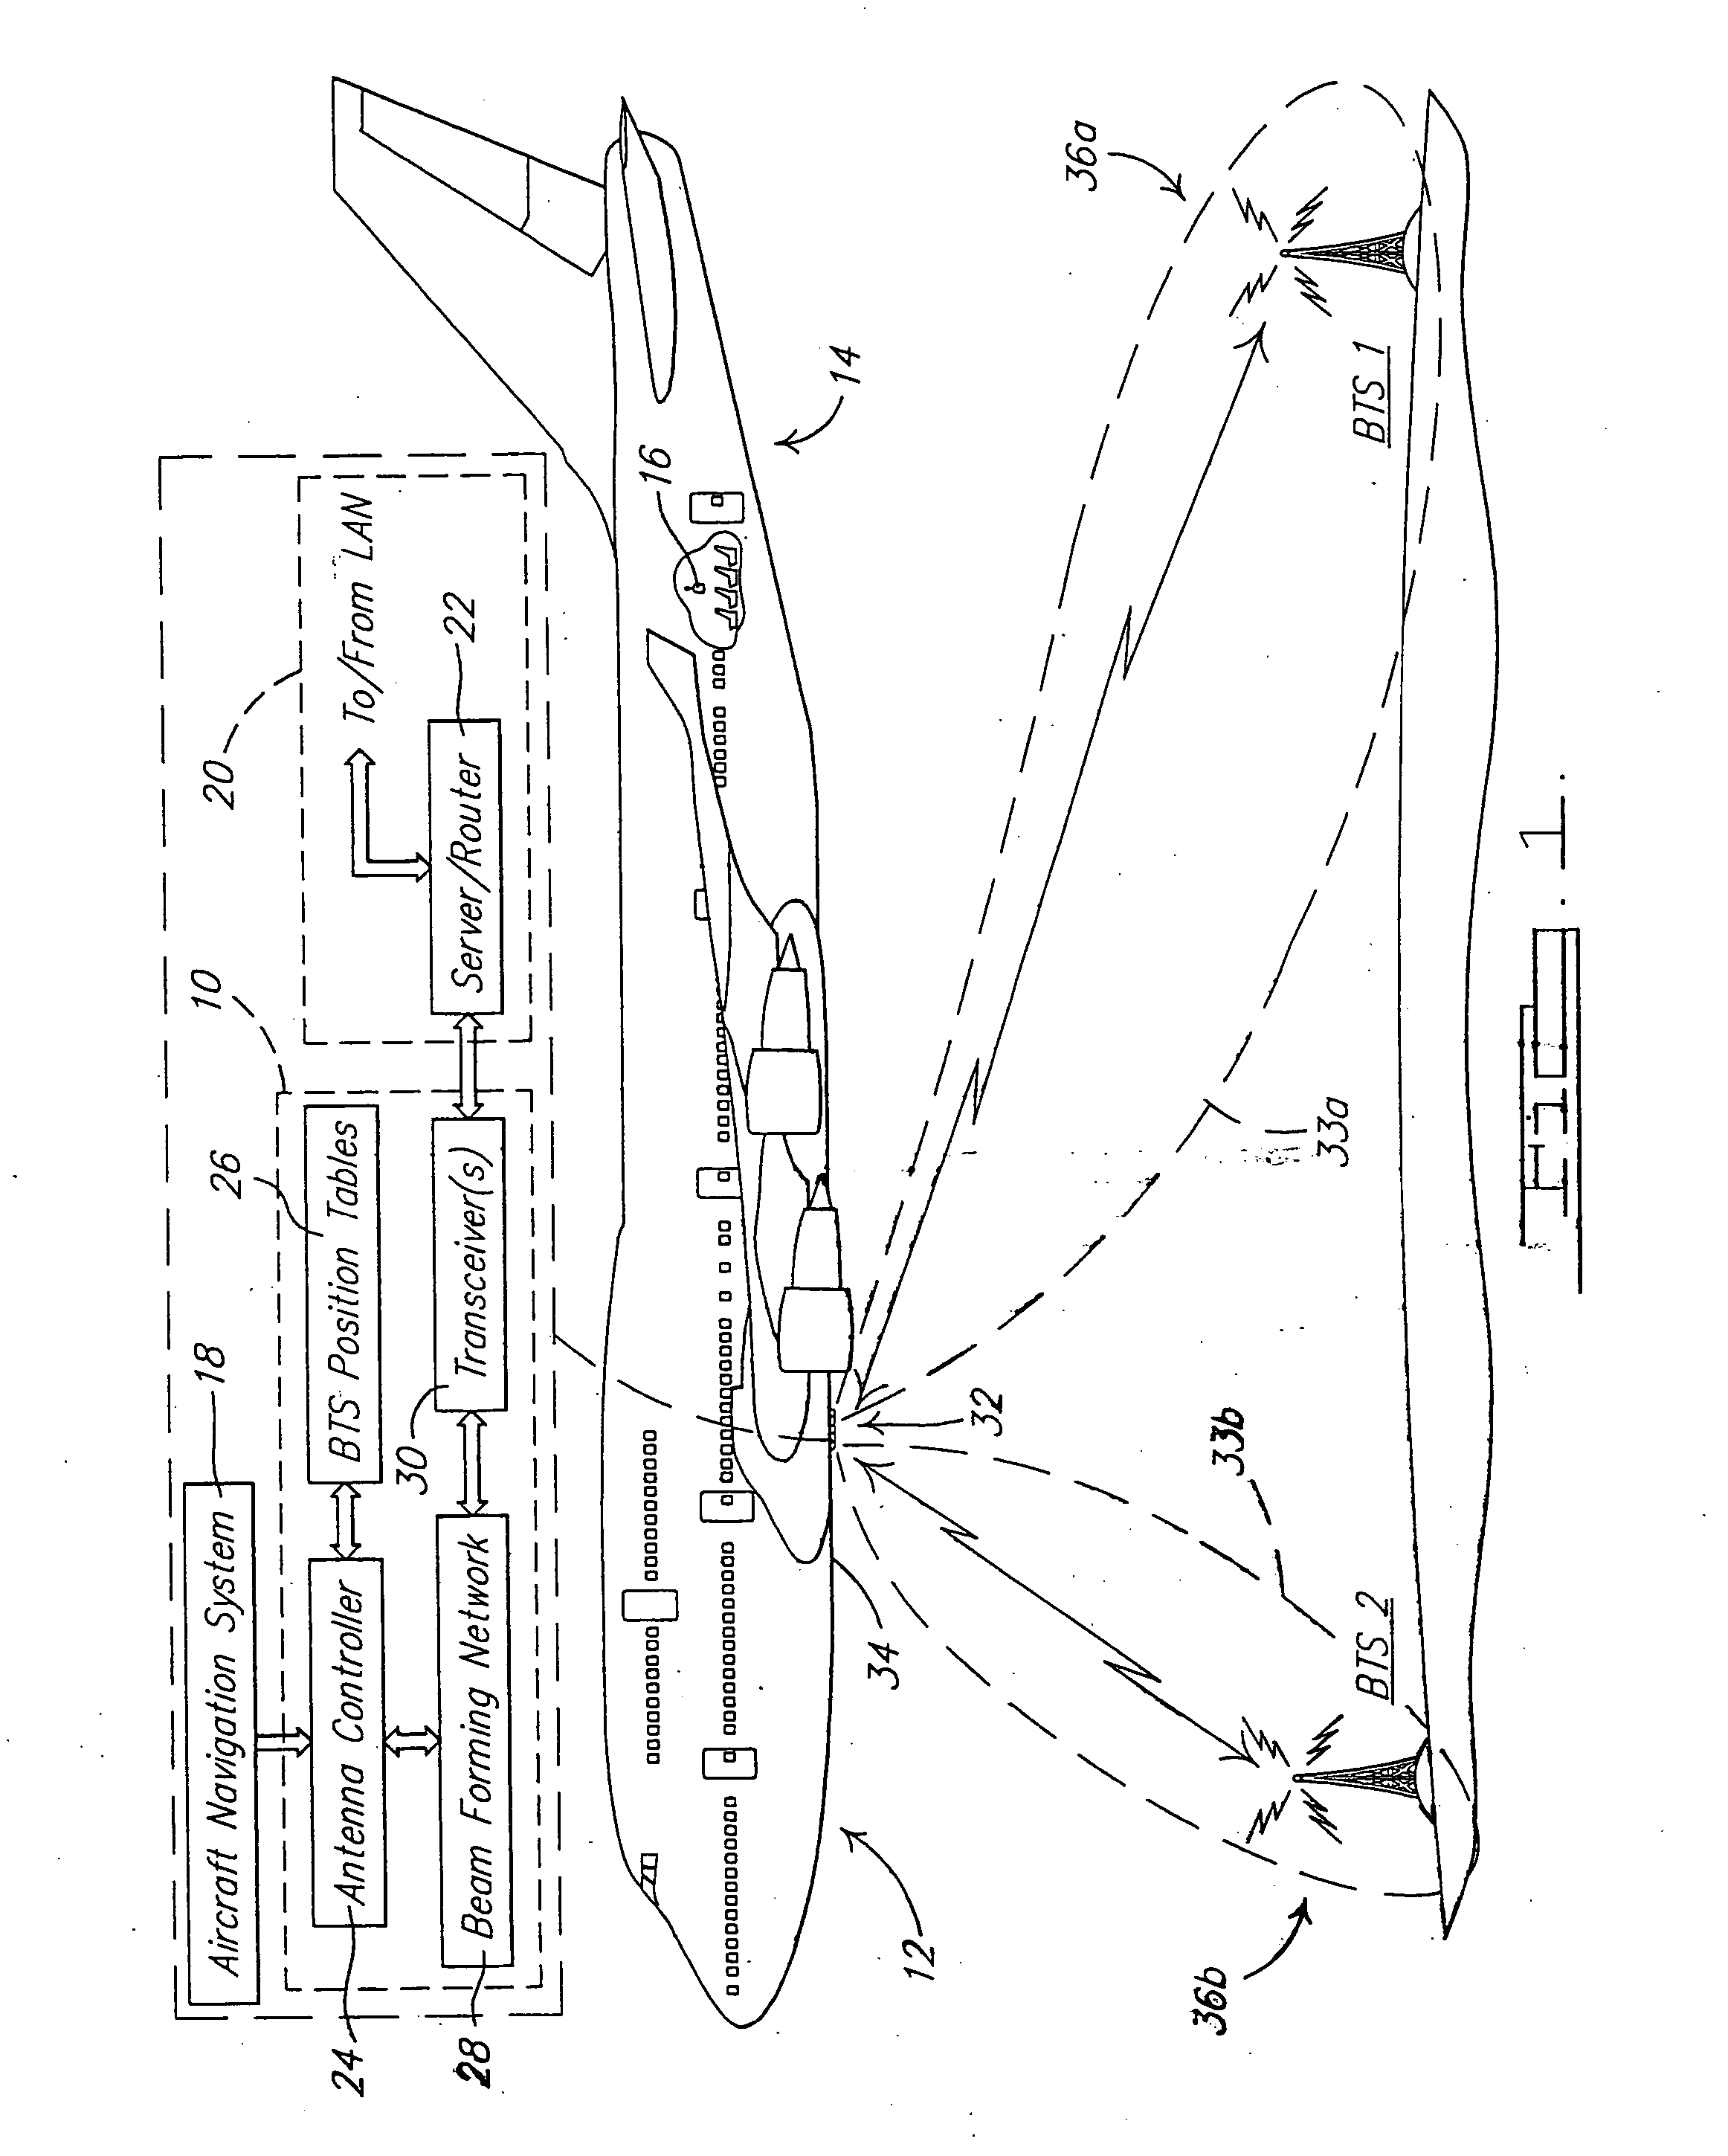 Point-to-multipoint communications system and method